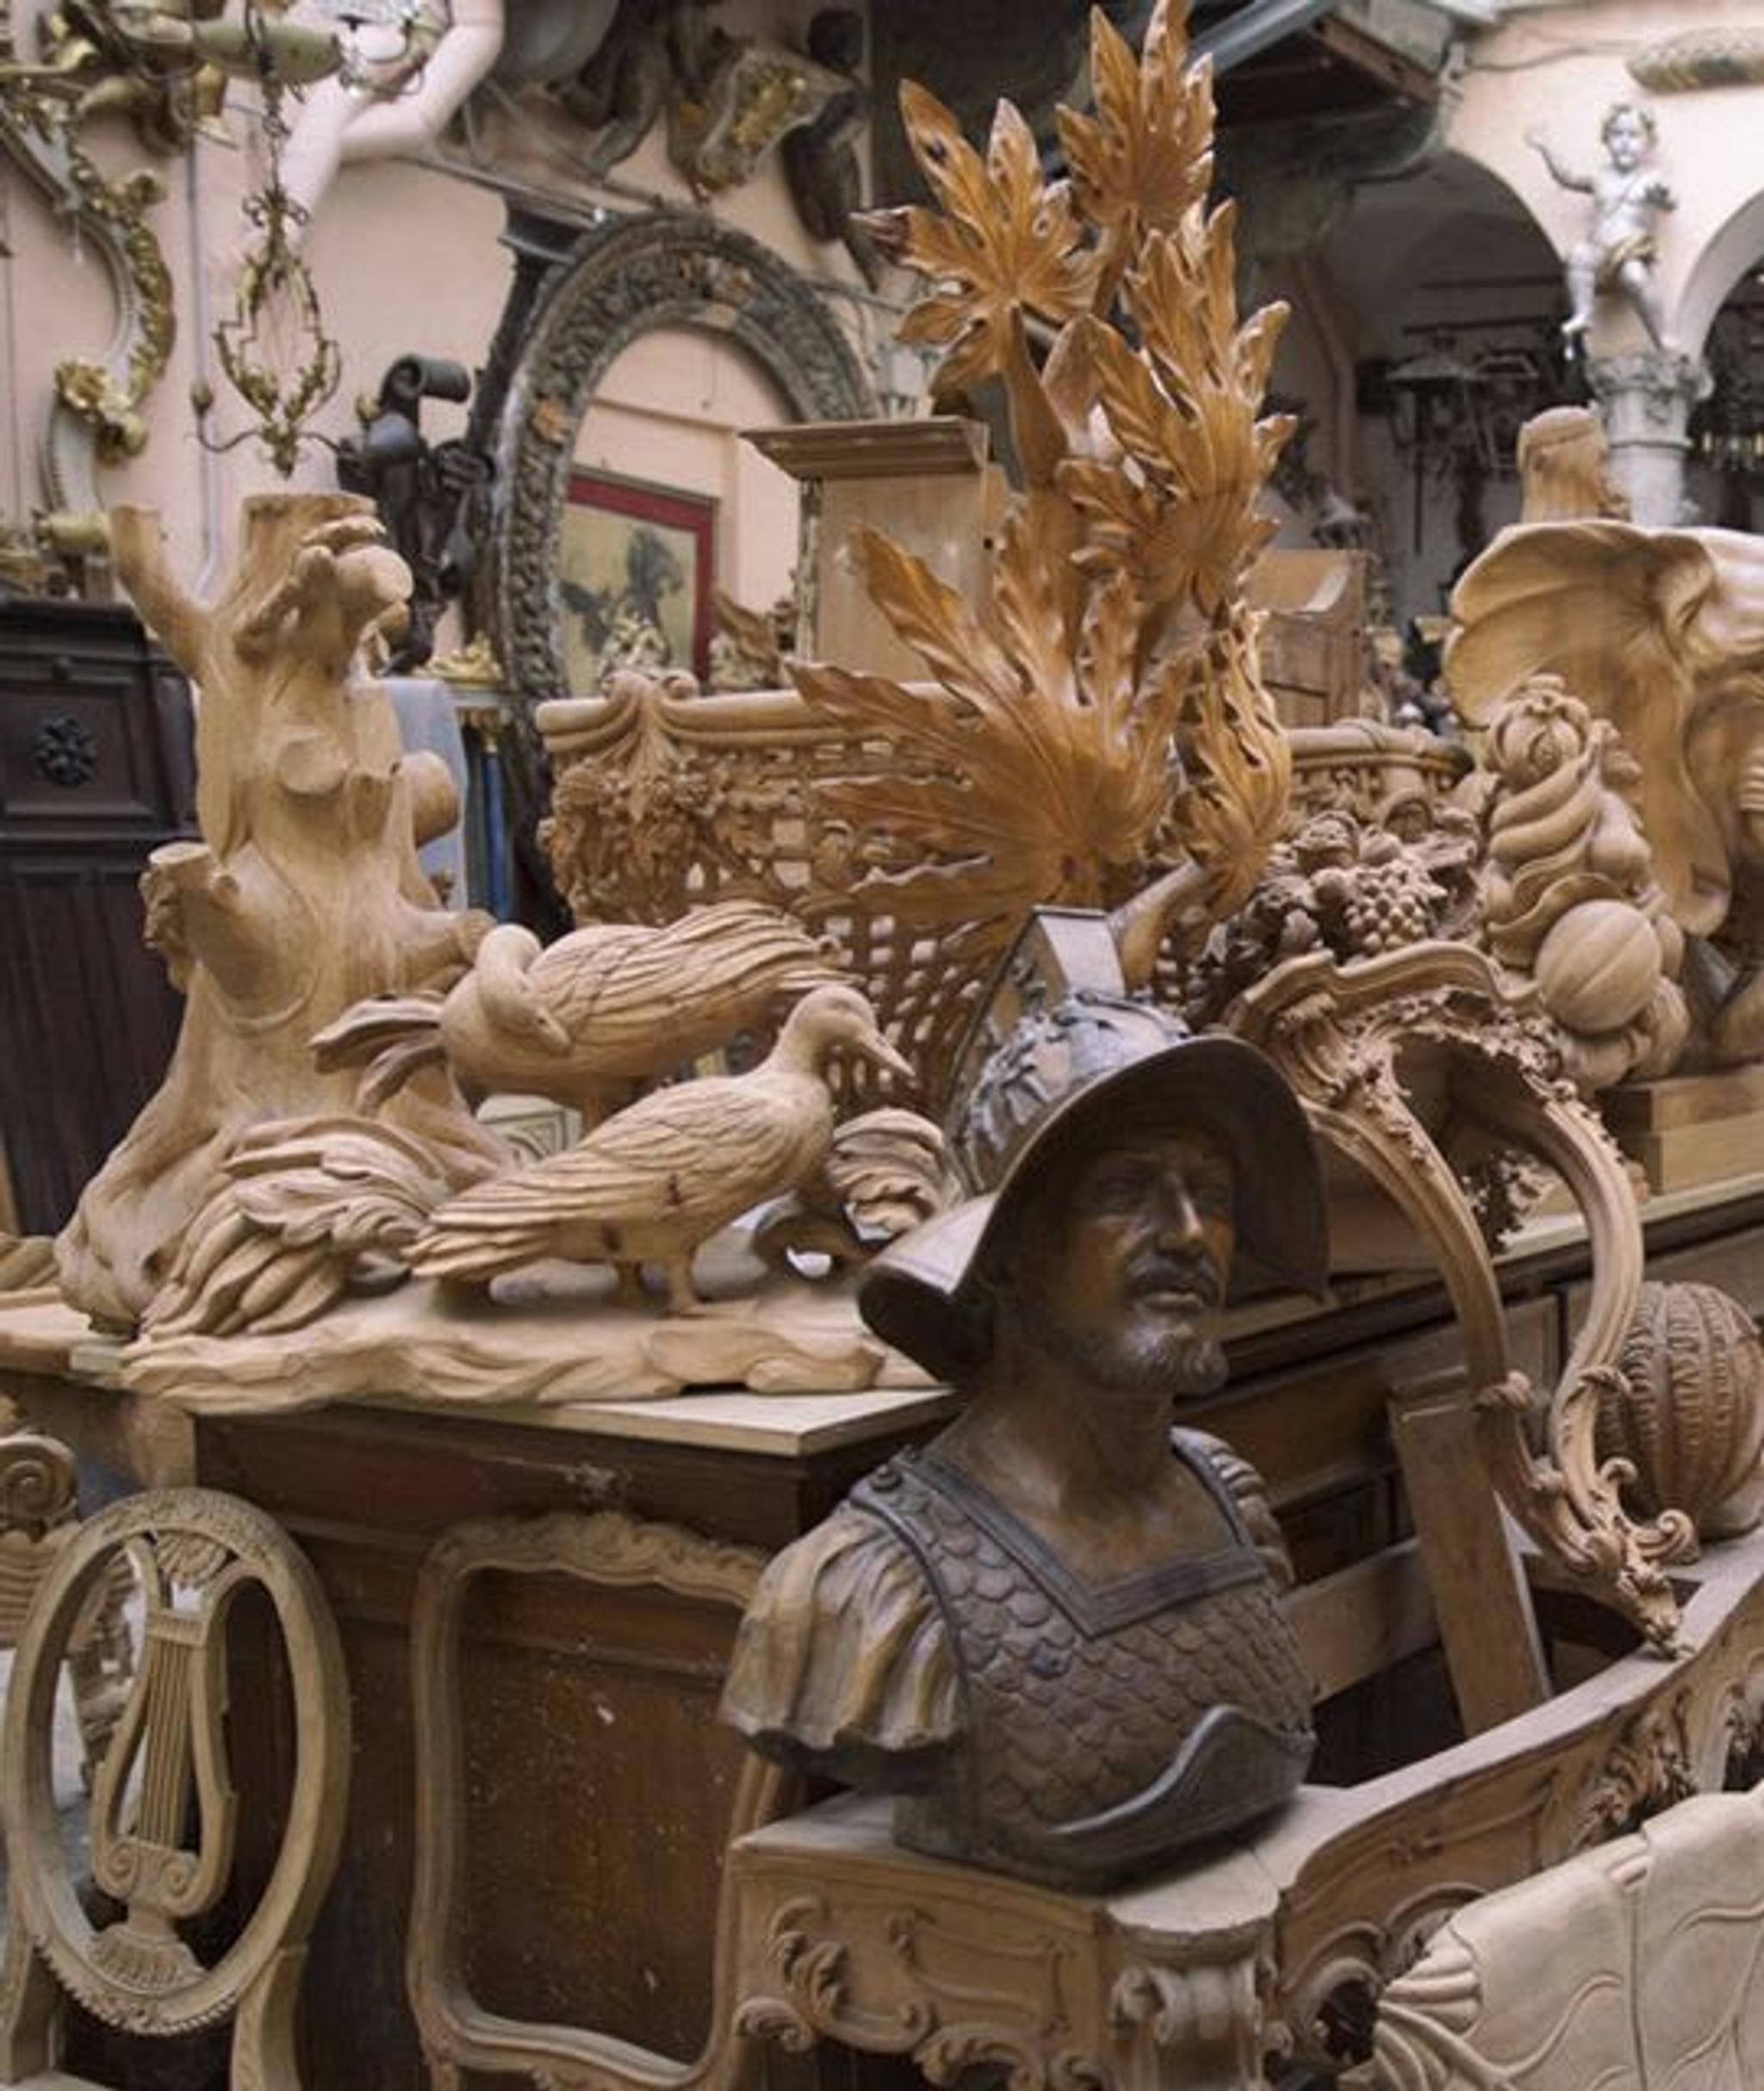 These stunning wooden masterpieces are fully hand-carved.